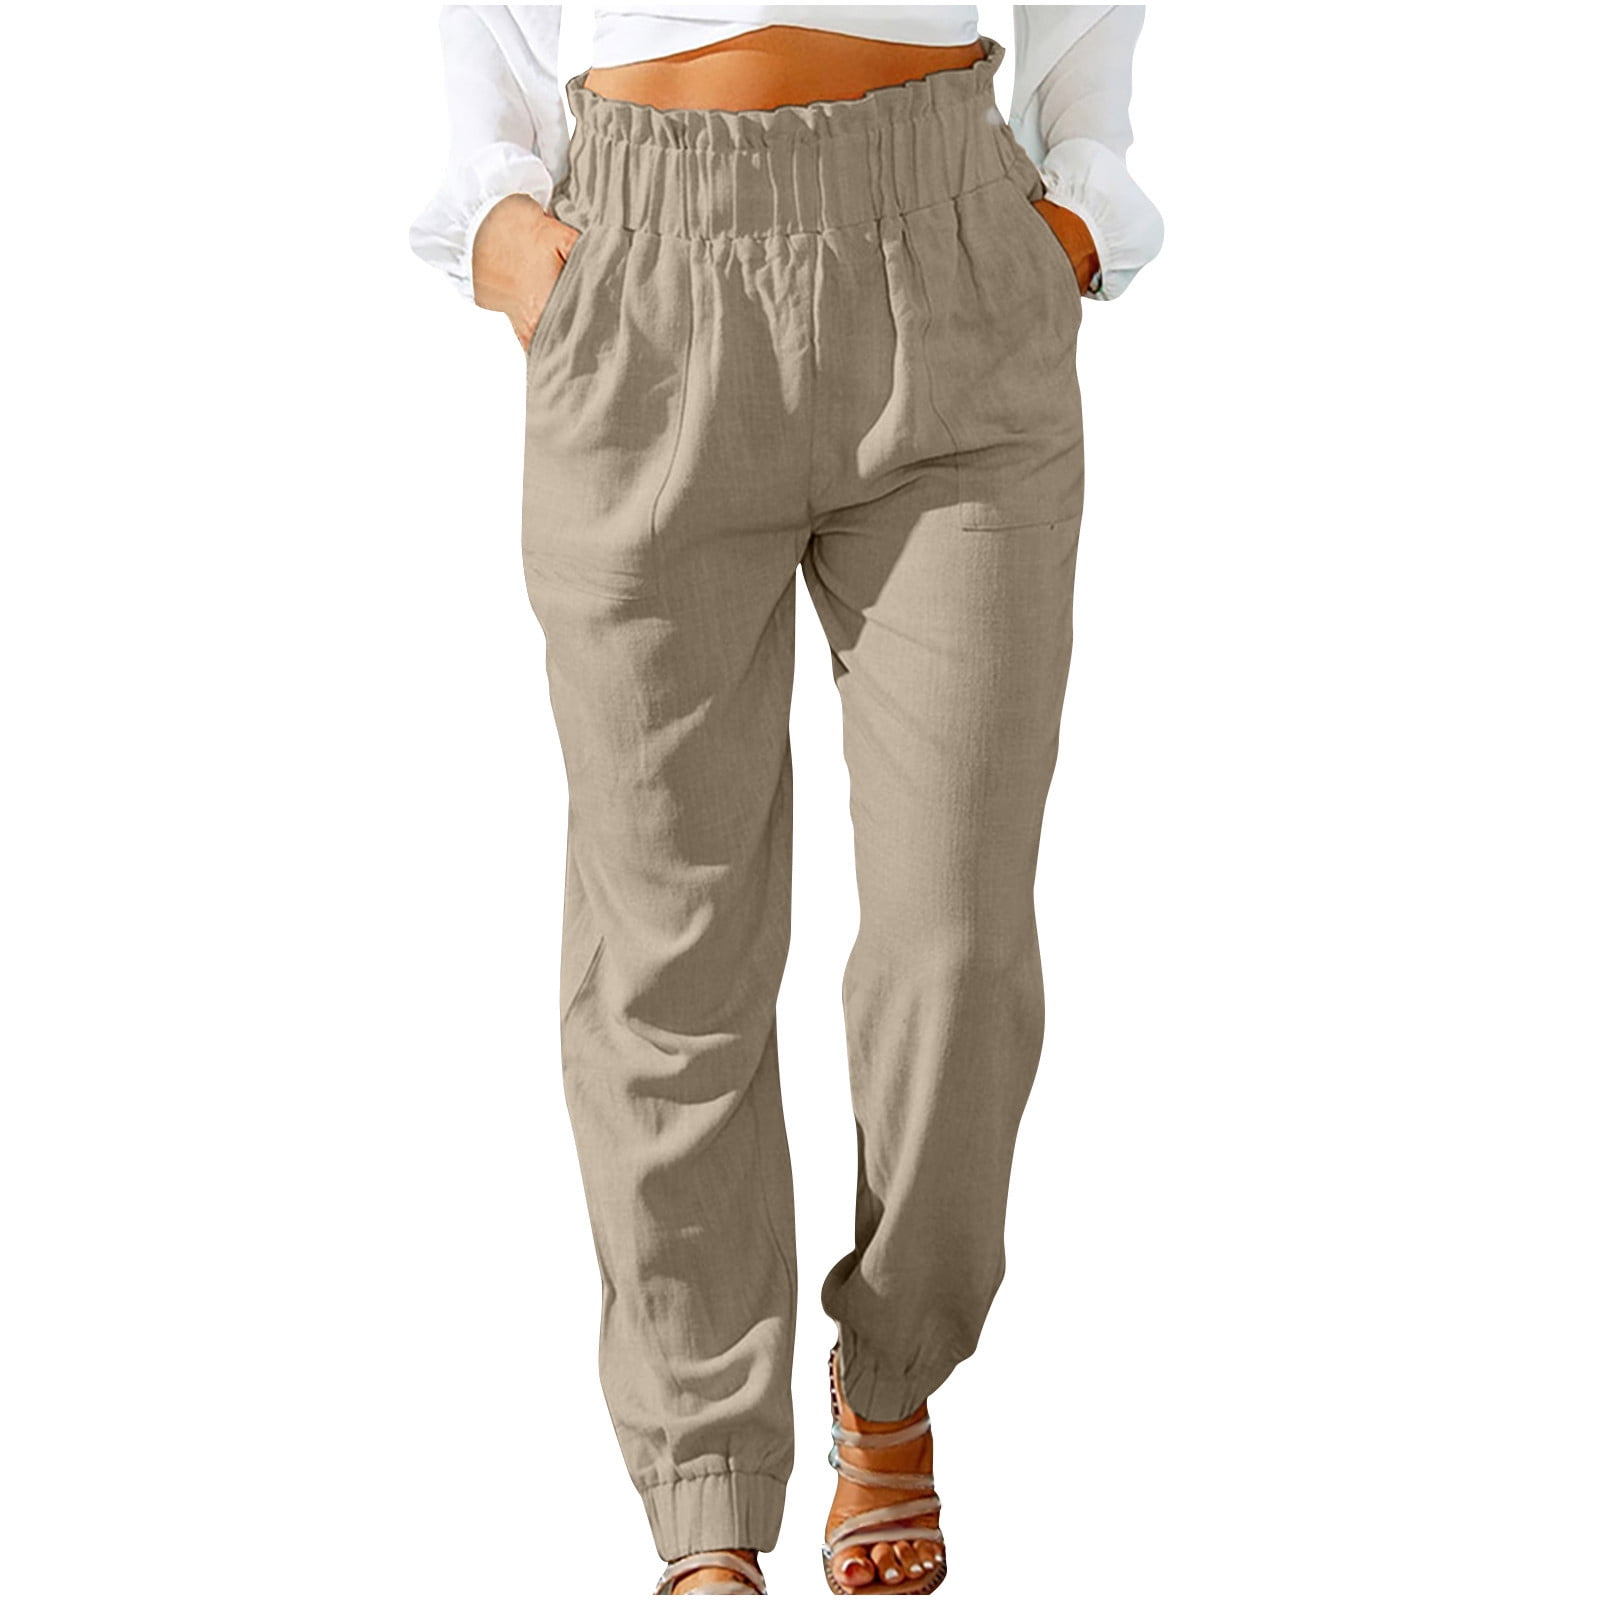 Bigersell Women Low Pro Pants Full Length Fashion Women Summer Casual Loose  Cotton And Linen Pocket Solid Trousers Pants Pull on Jeans for Ladies  Stretch 